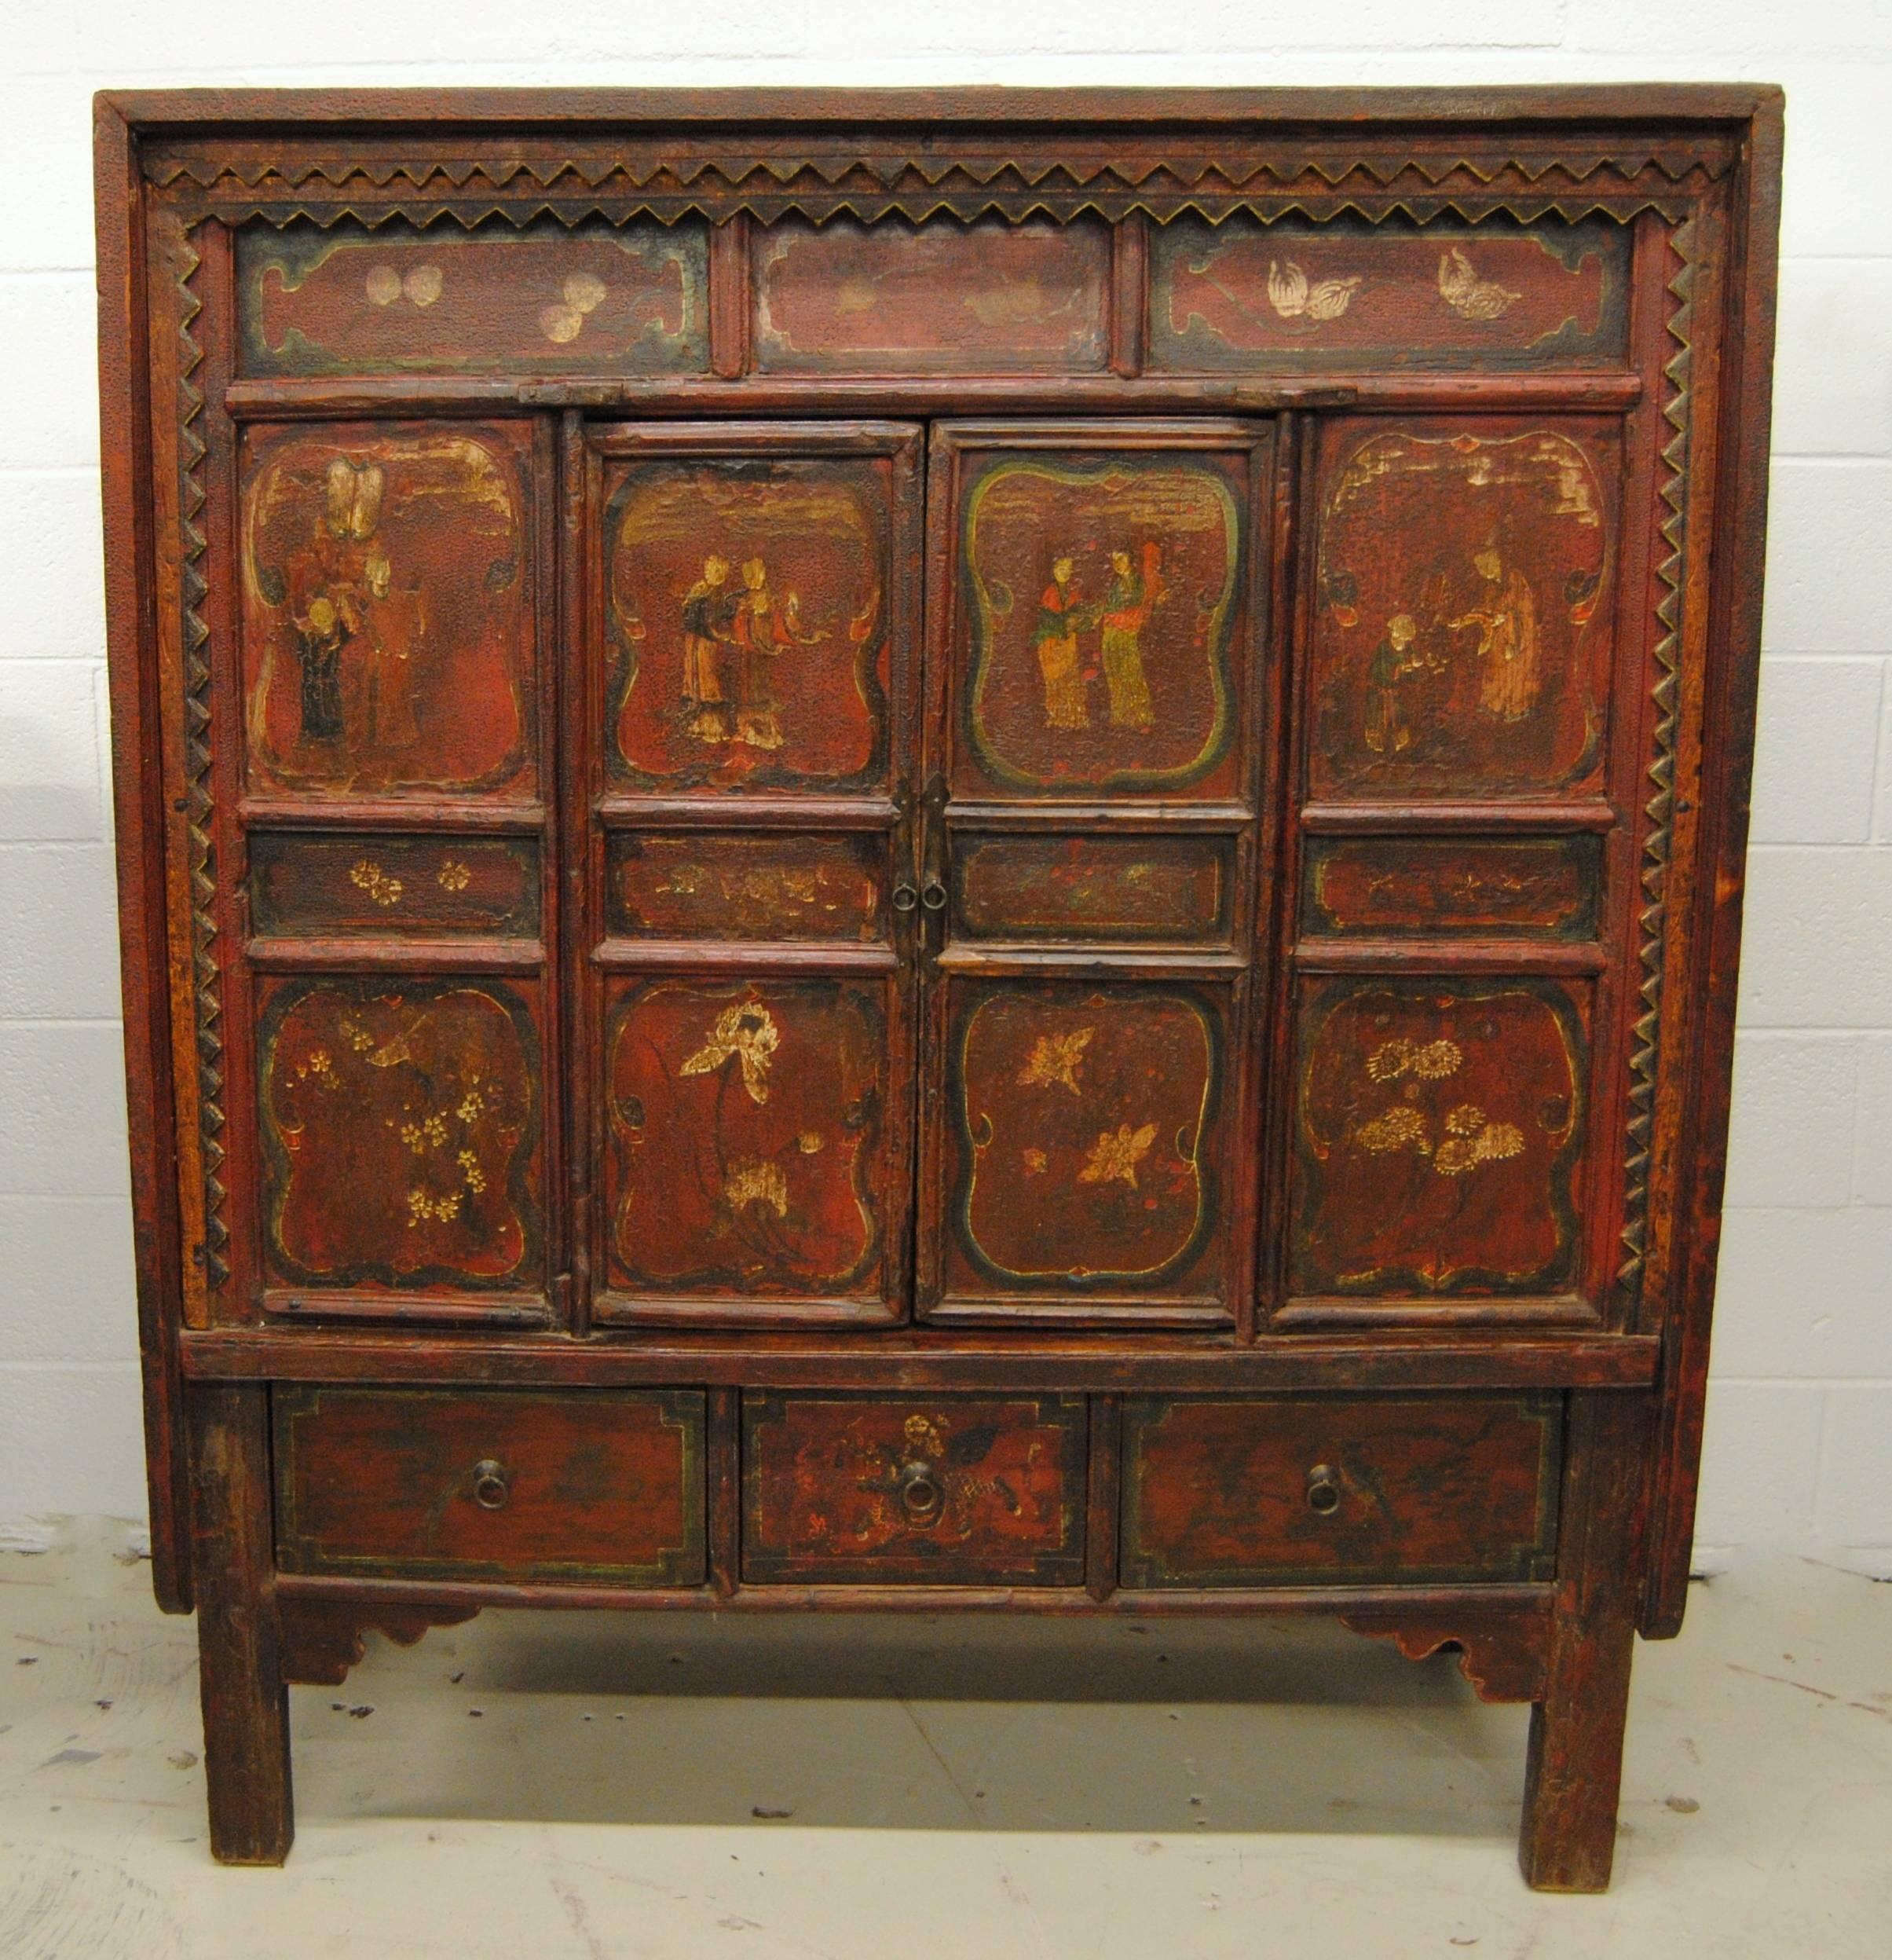 Antique Chinese 19th century Shanxi province armoire. The Asian cabinet has incredible figural designs and strong original color. The armoire has two doors that open out with an inside shelf and three lower drawers. All hand hewn with zig zag